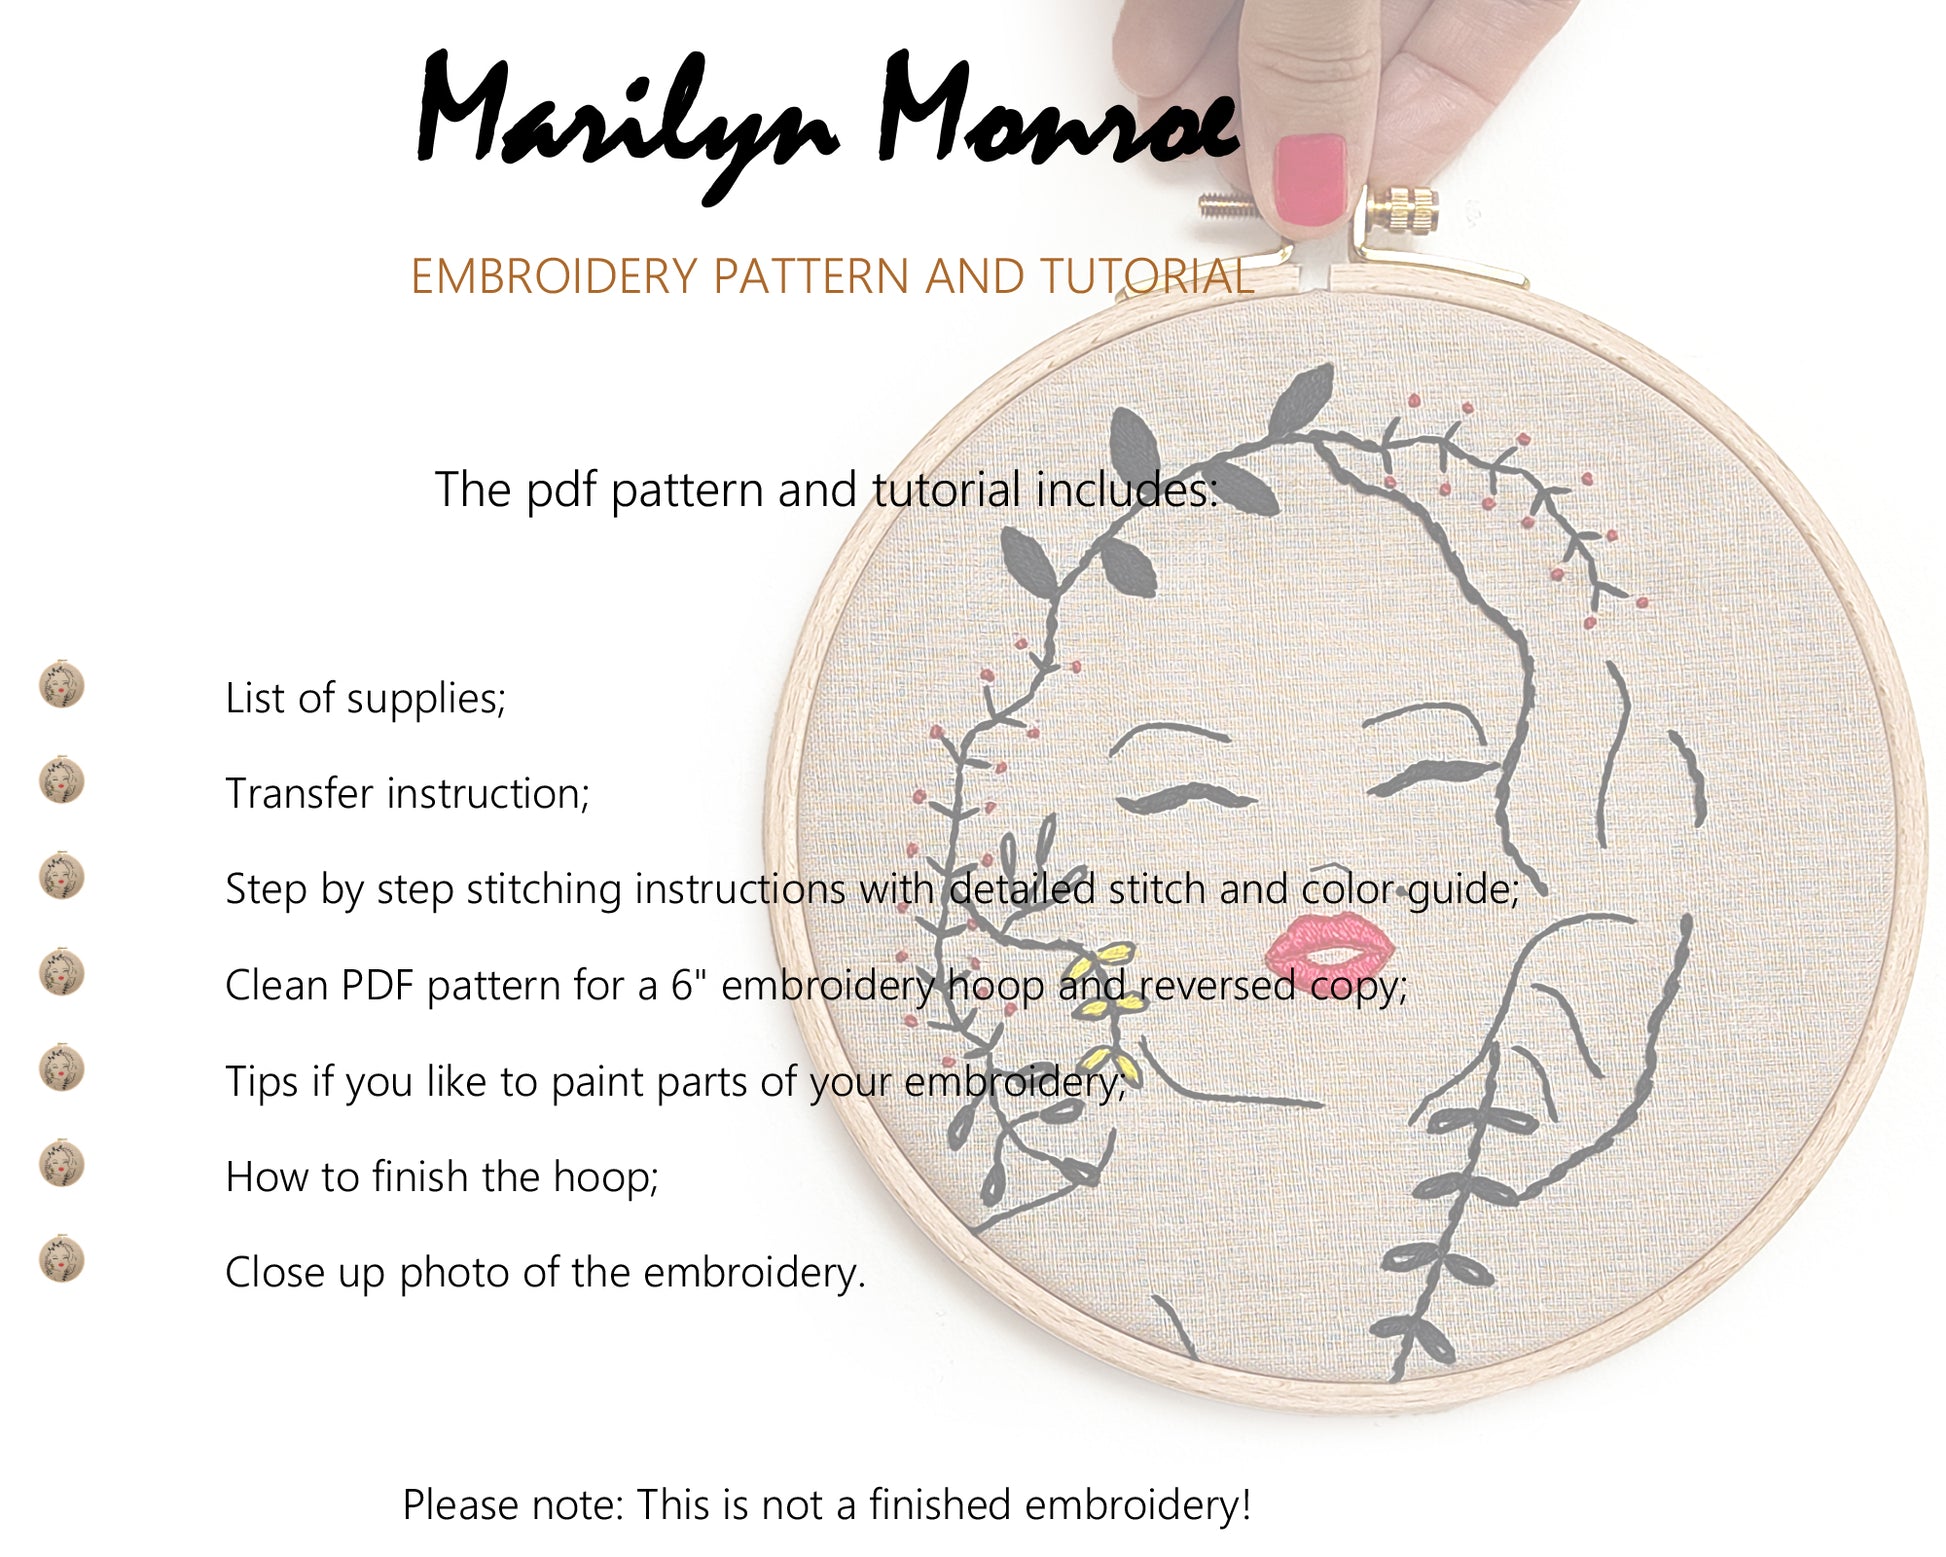 Marilyn Monroe - PDF embroidery pattern and tutorial 08